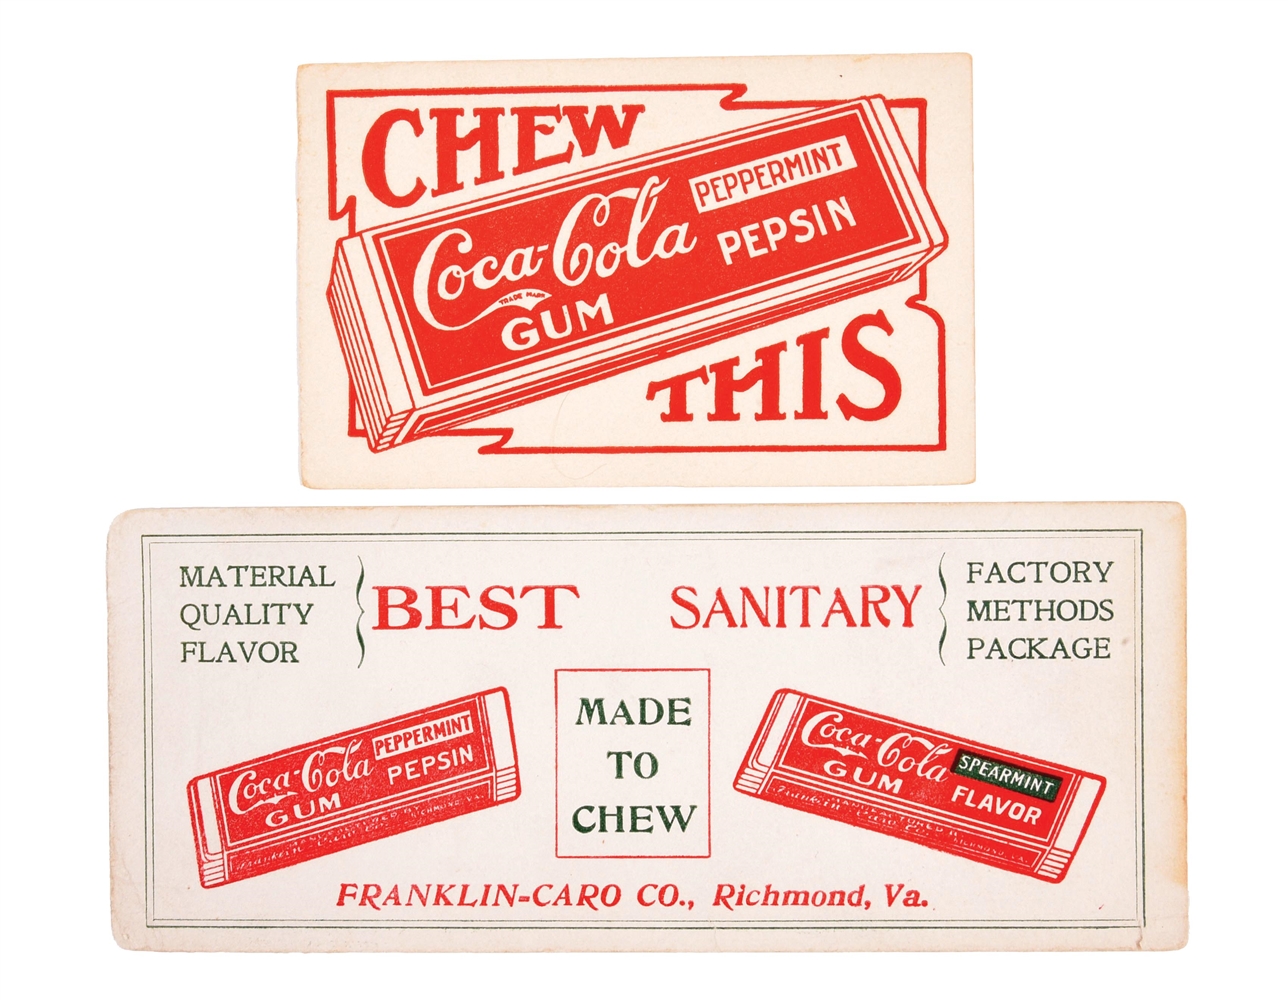 COLLECTION OF 2 COCA-COLA CHEWING GUM BLOTTERS